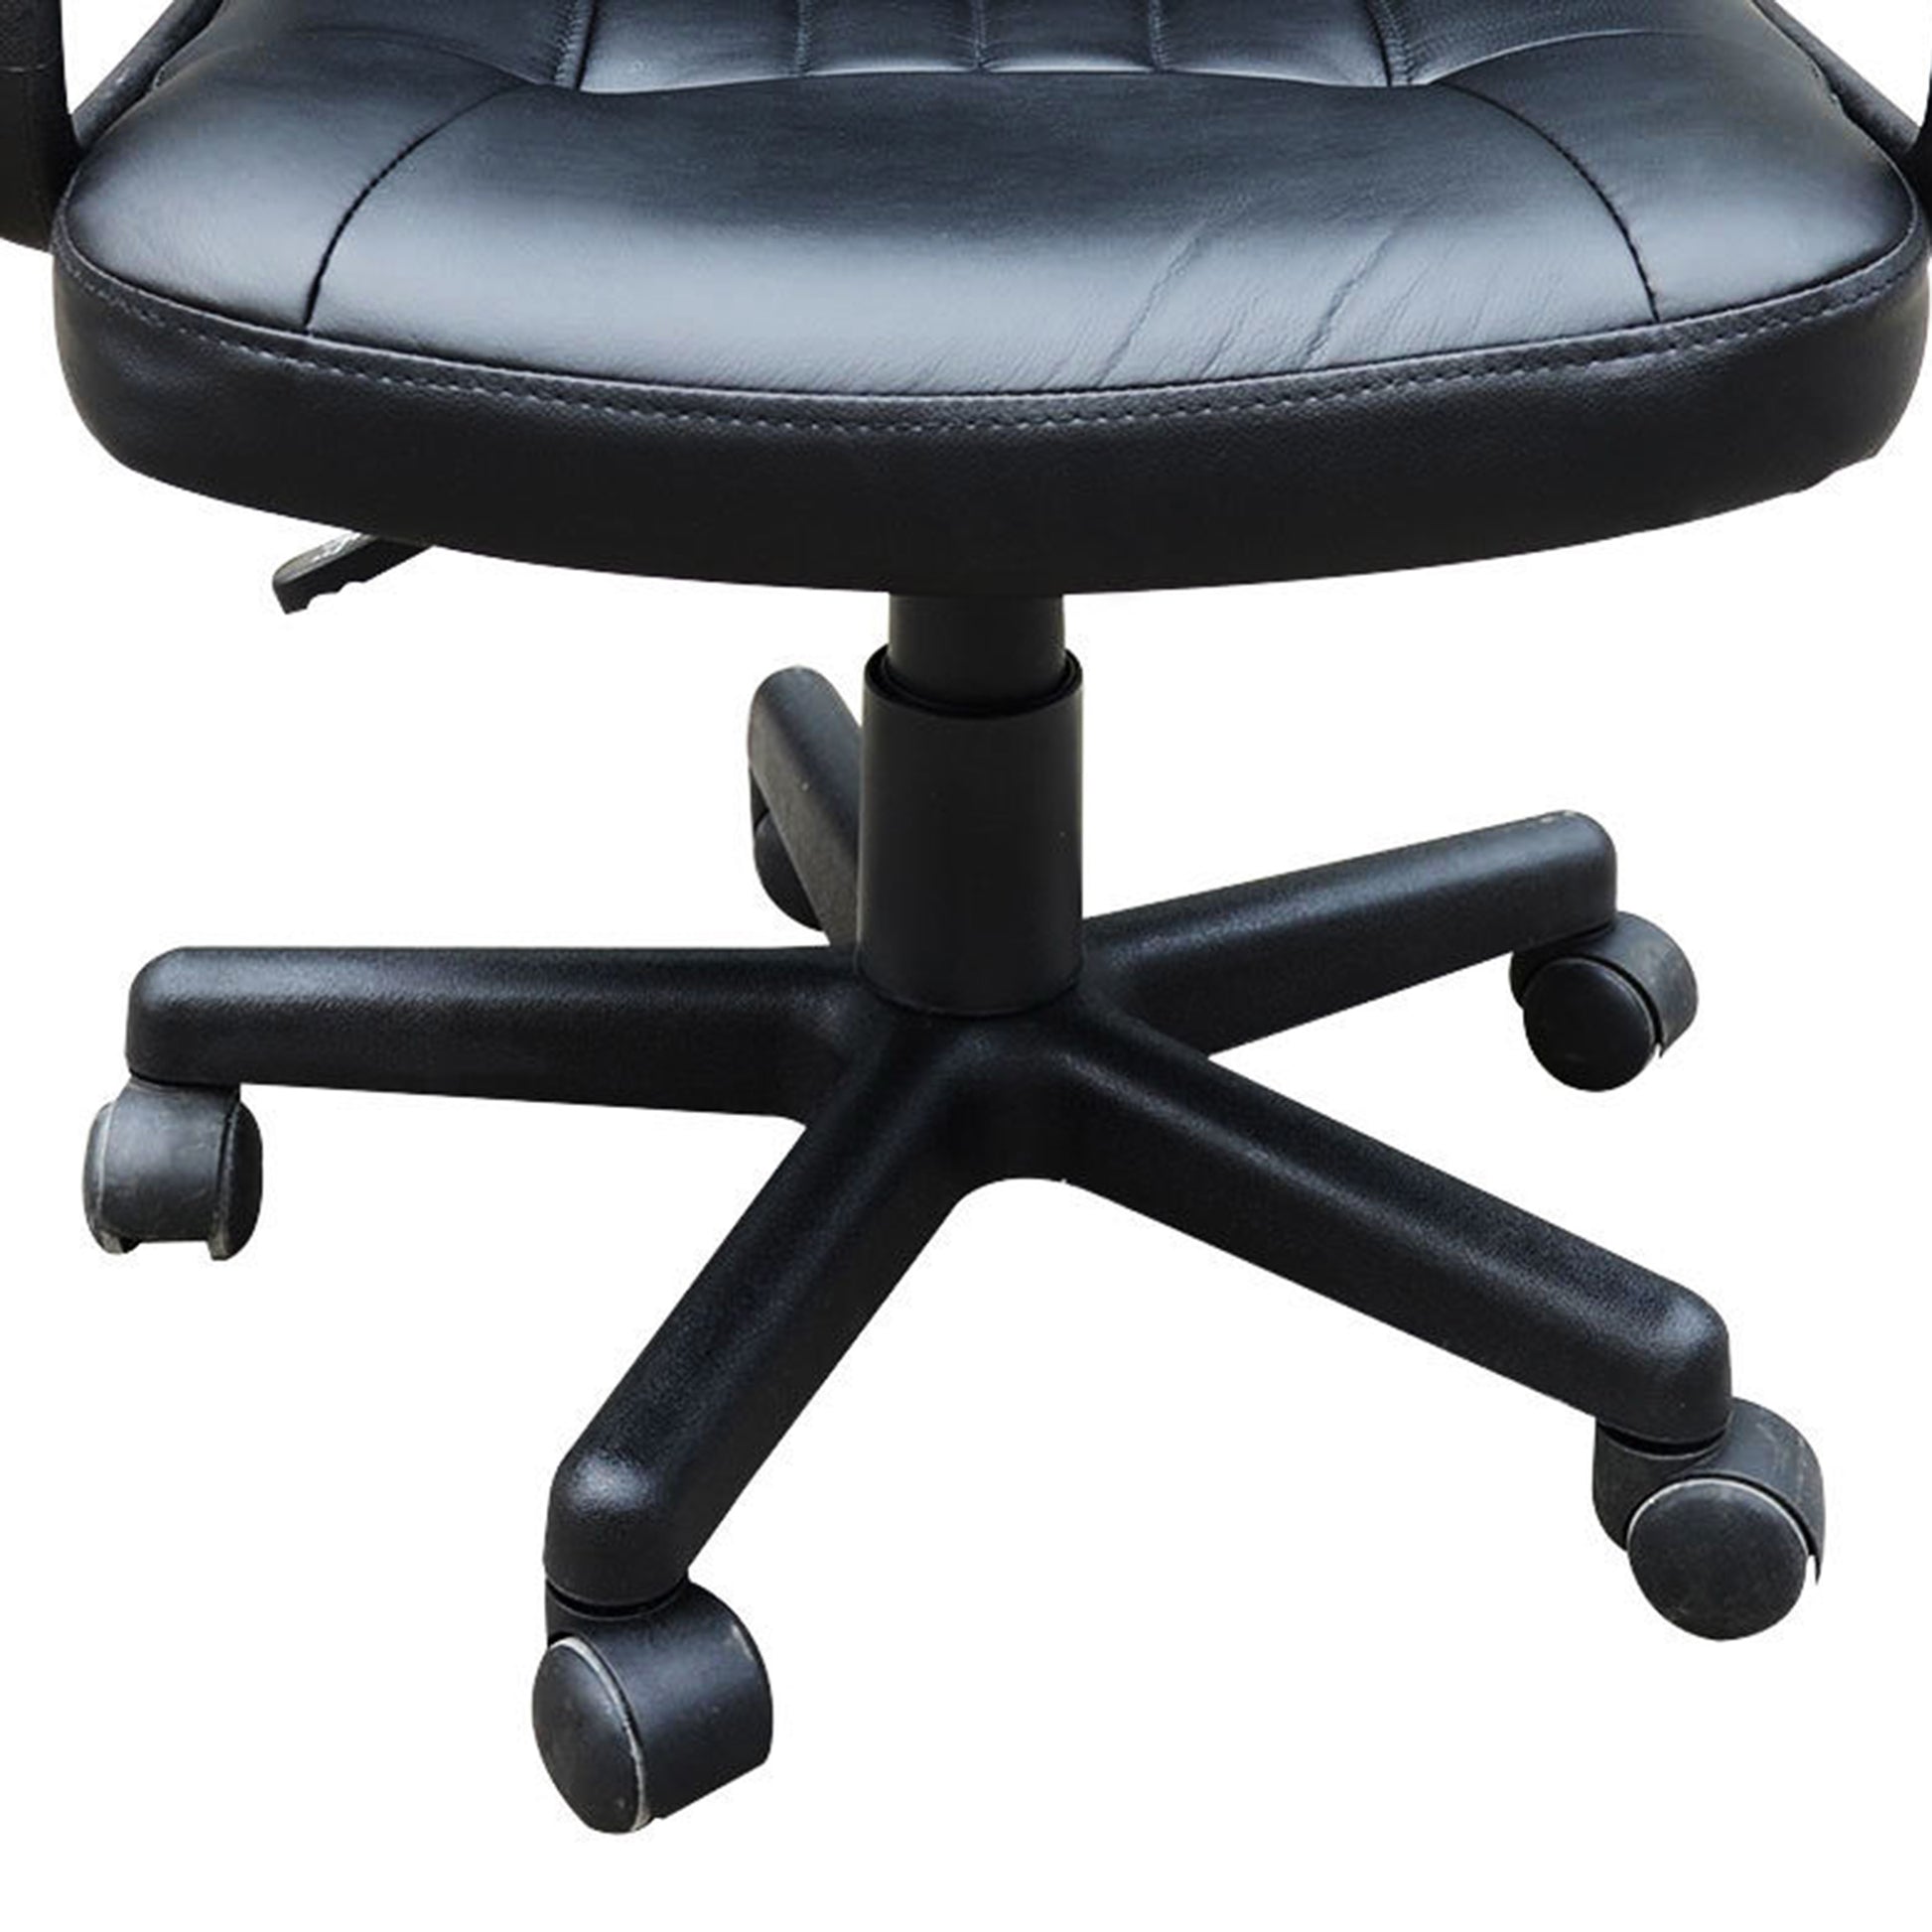 Swivel Executive Office Chair, PU Leather Desk Chair, Computer Chair, Gaming Seater, Black, HOMCOM, 9